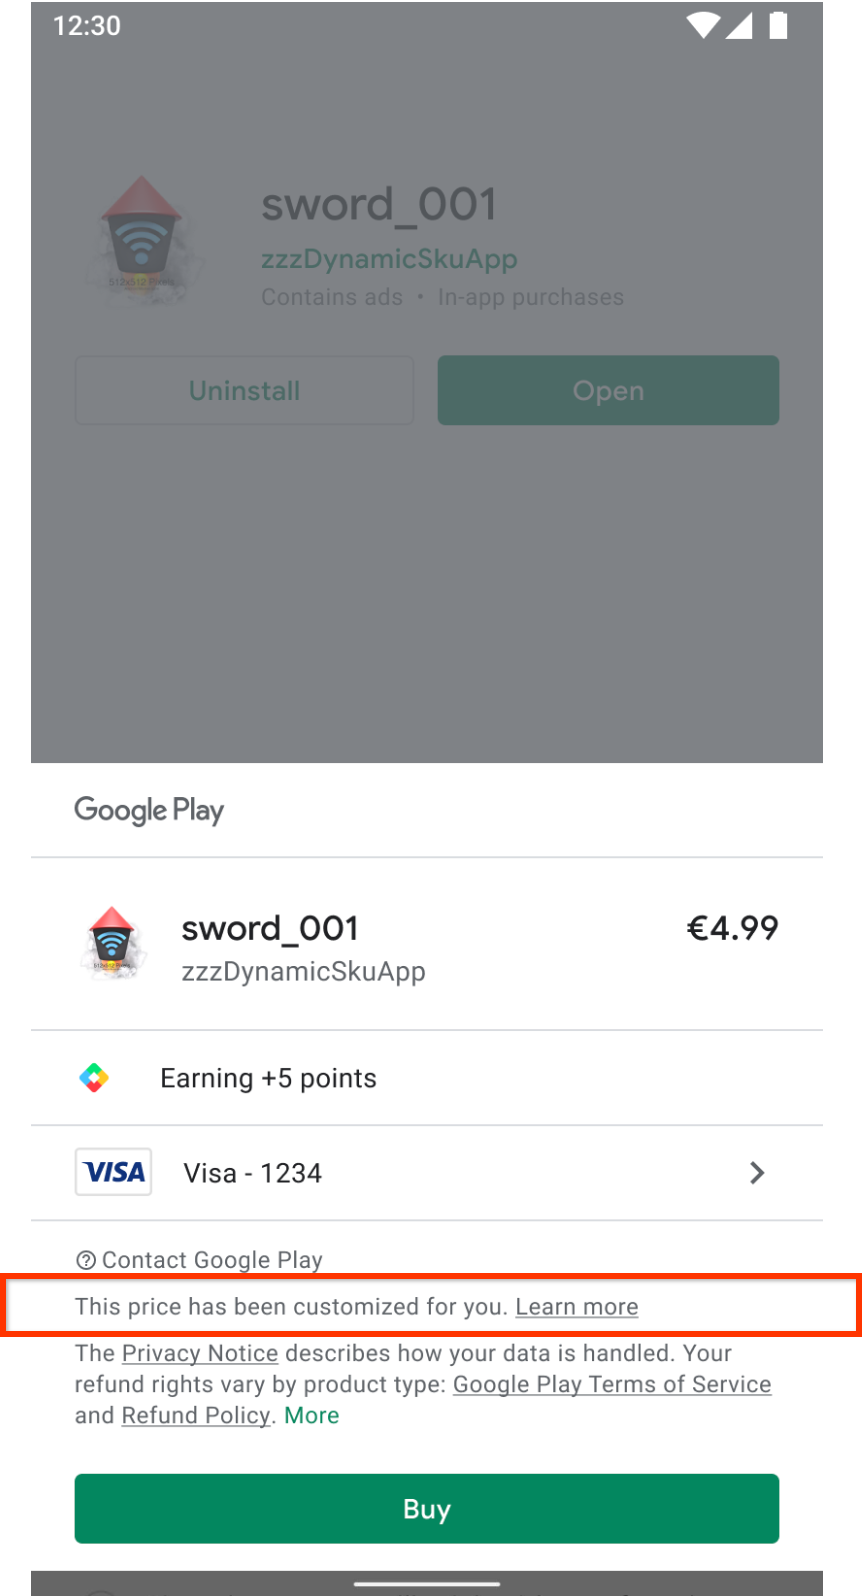 The Google Play purchase screen indicating that the price was customized for the user.